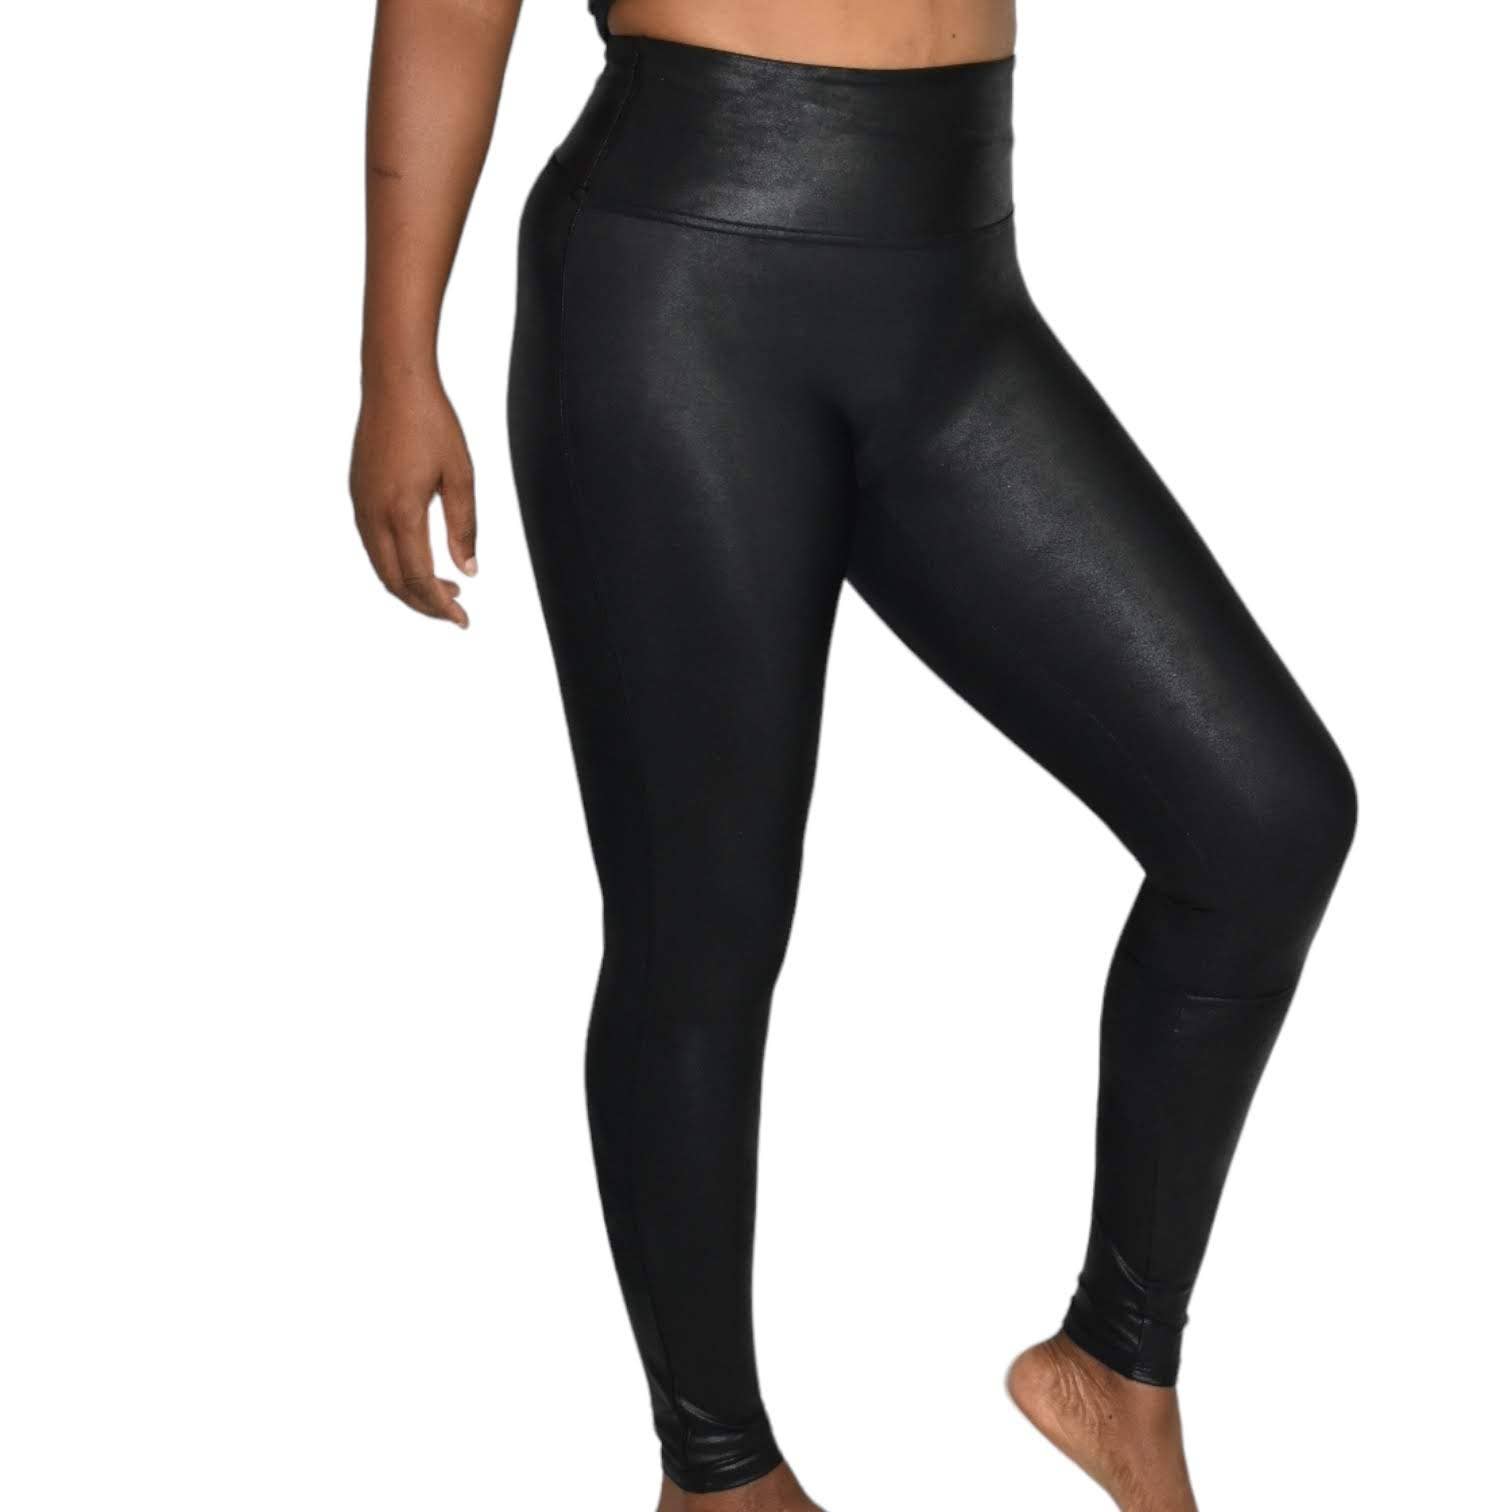 Spanx Faux Leather Leggings Black Seam Free Contoured Shaping Compression Size Small